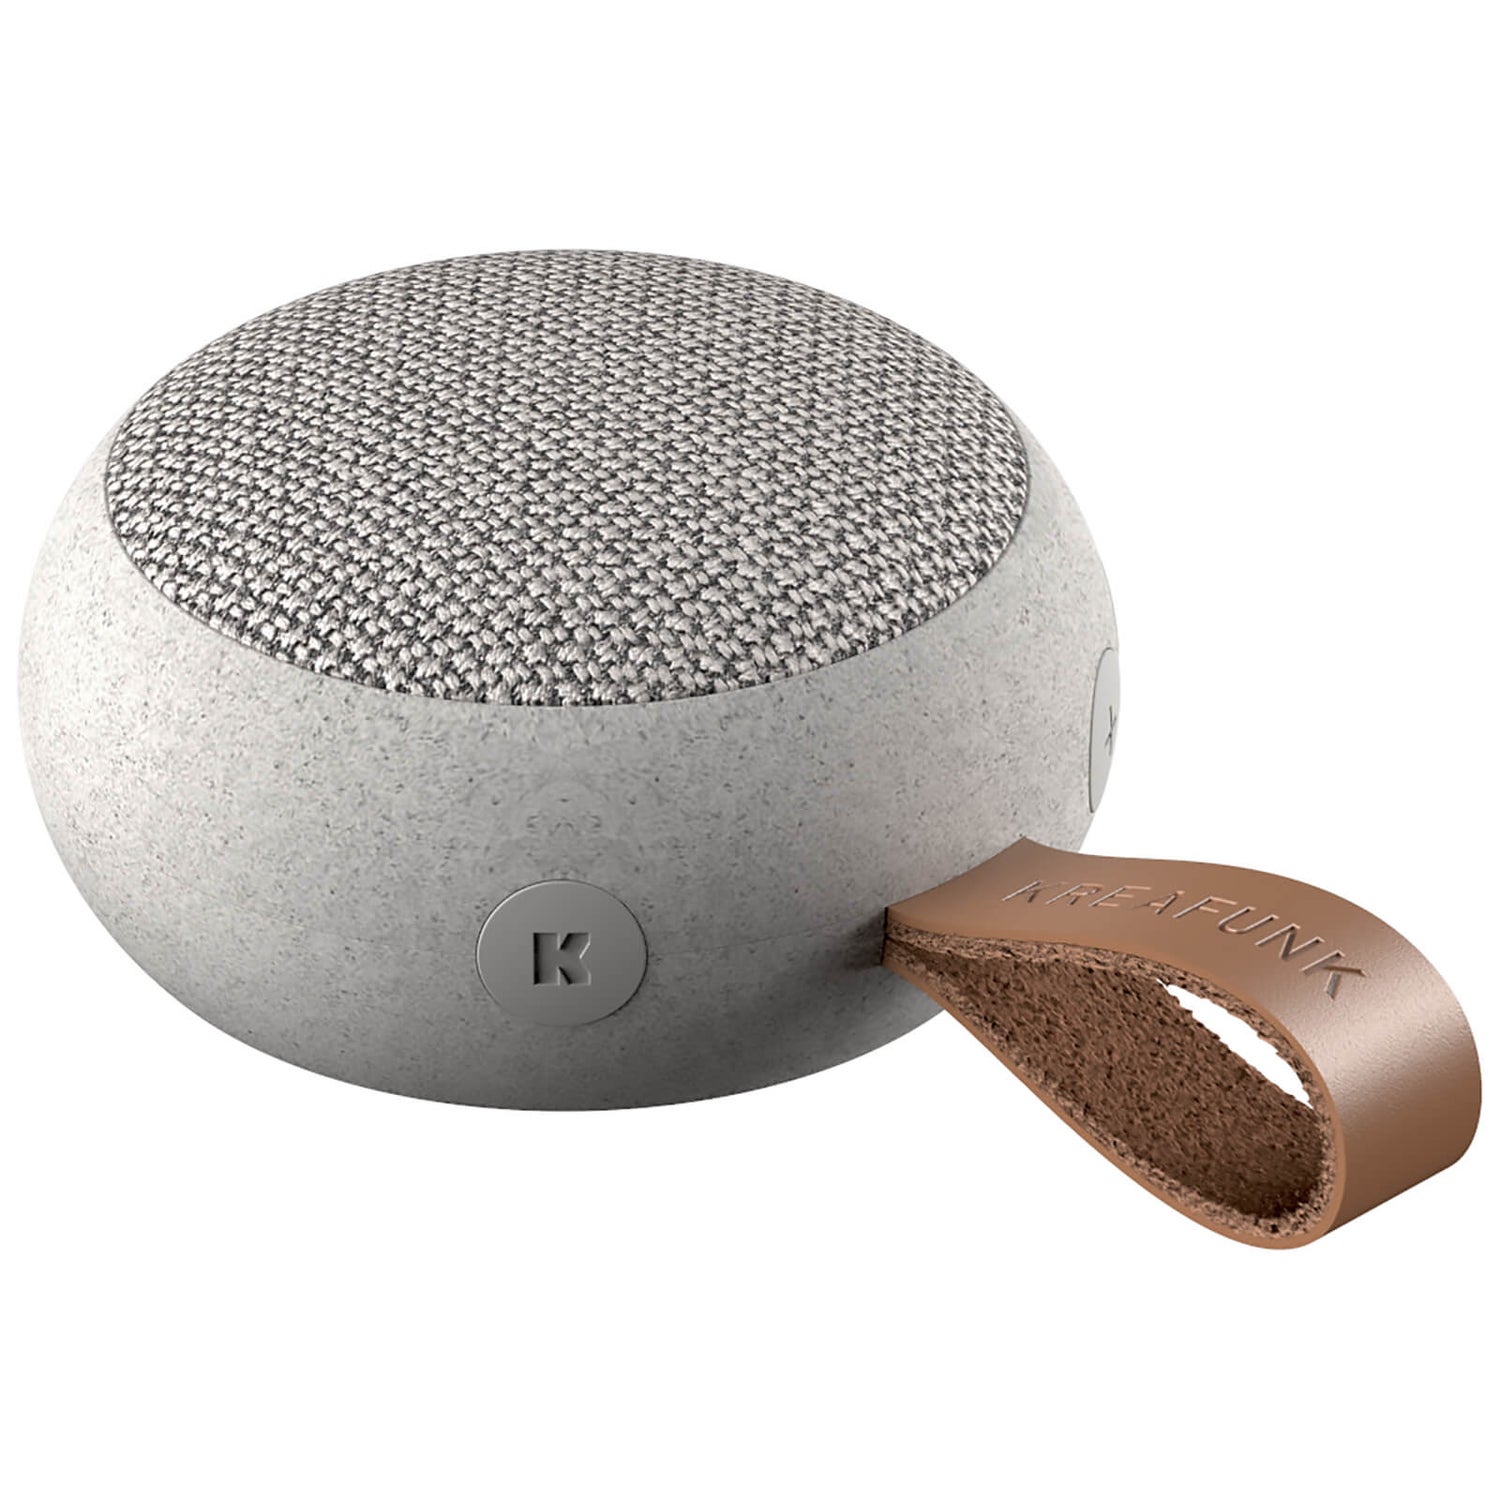 Kreafunk aGO Bluetooth Speaker - Care Collection